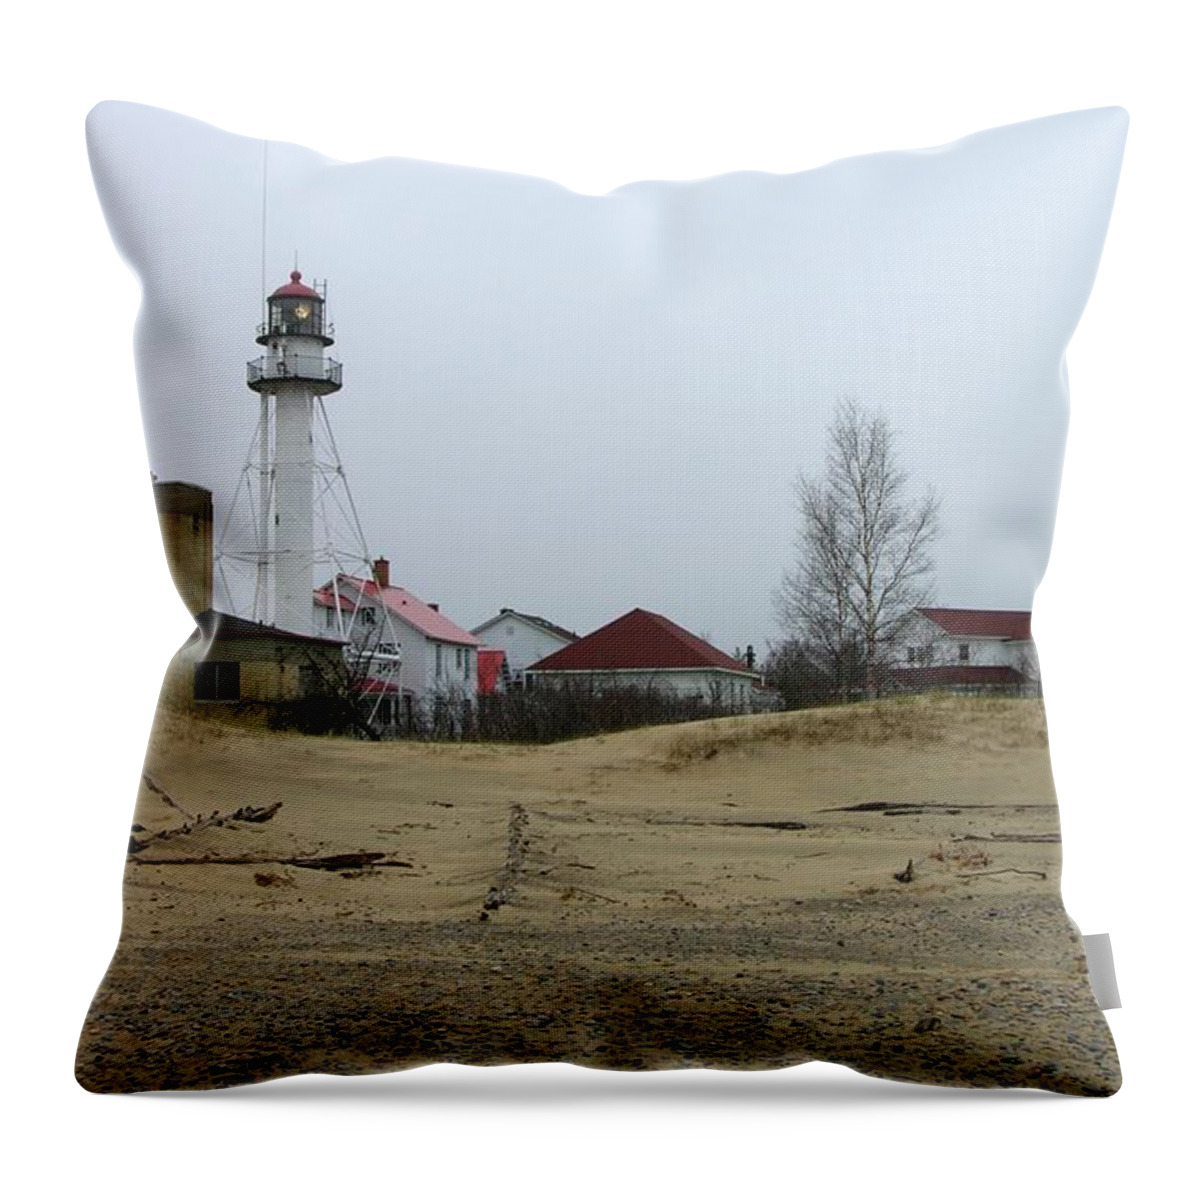 Whitefish Point Light Station Throw Pillow featuring the photograph Whitefish Point Light Station by Keith Stokes